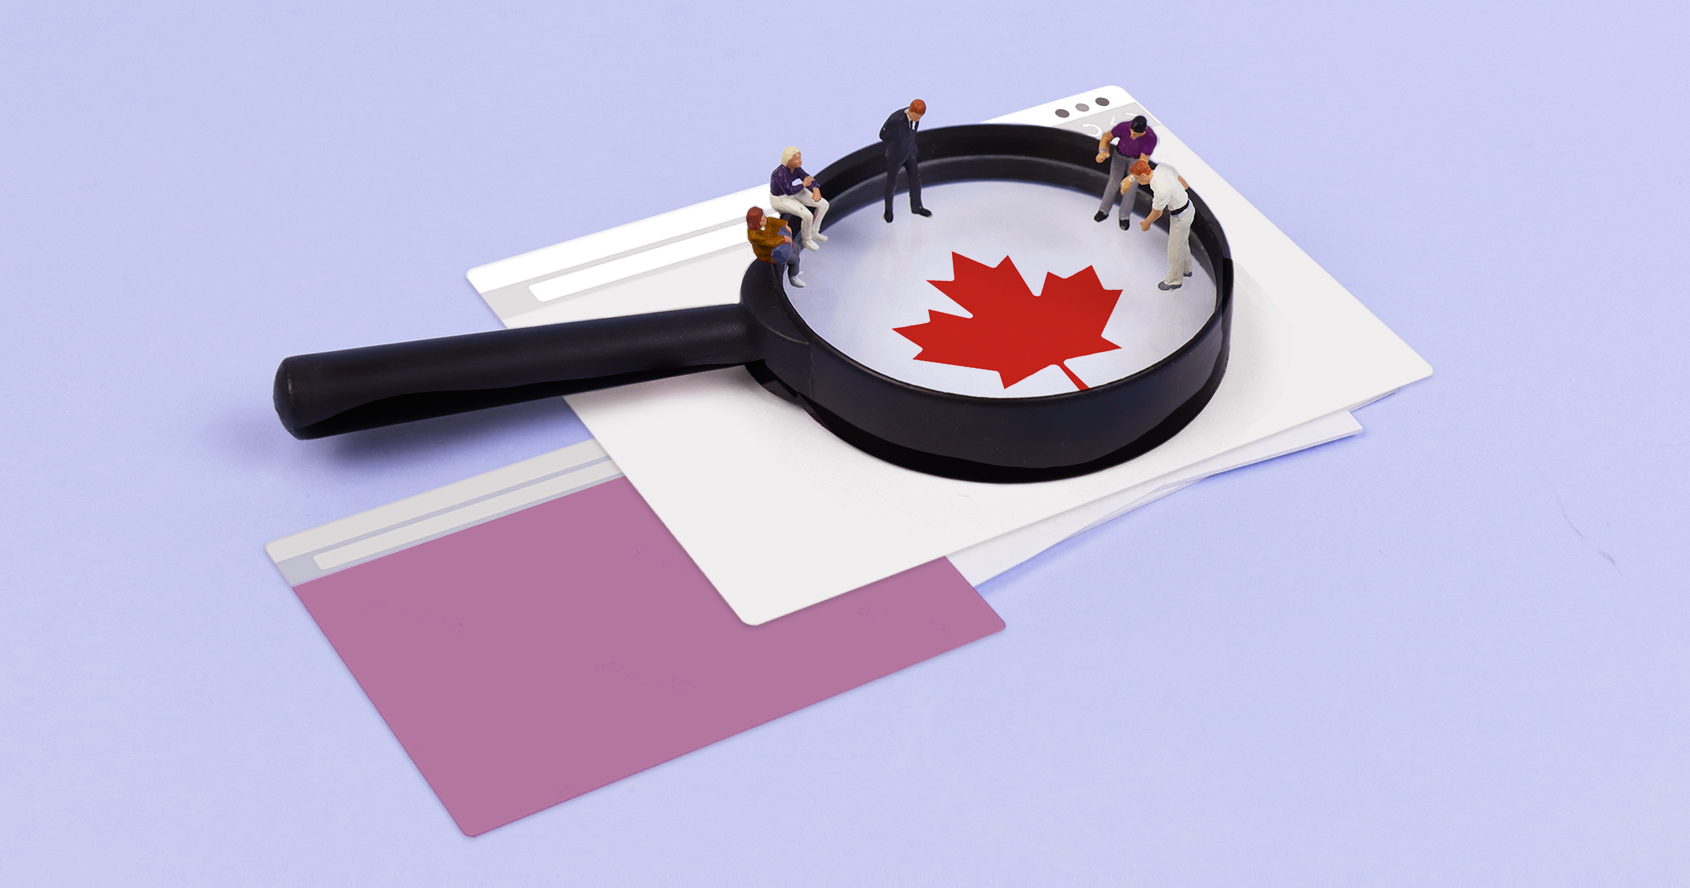 Top software development companies in Canada as reviewed by Canadians